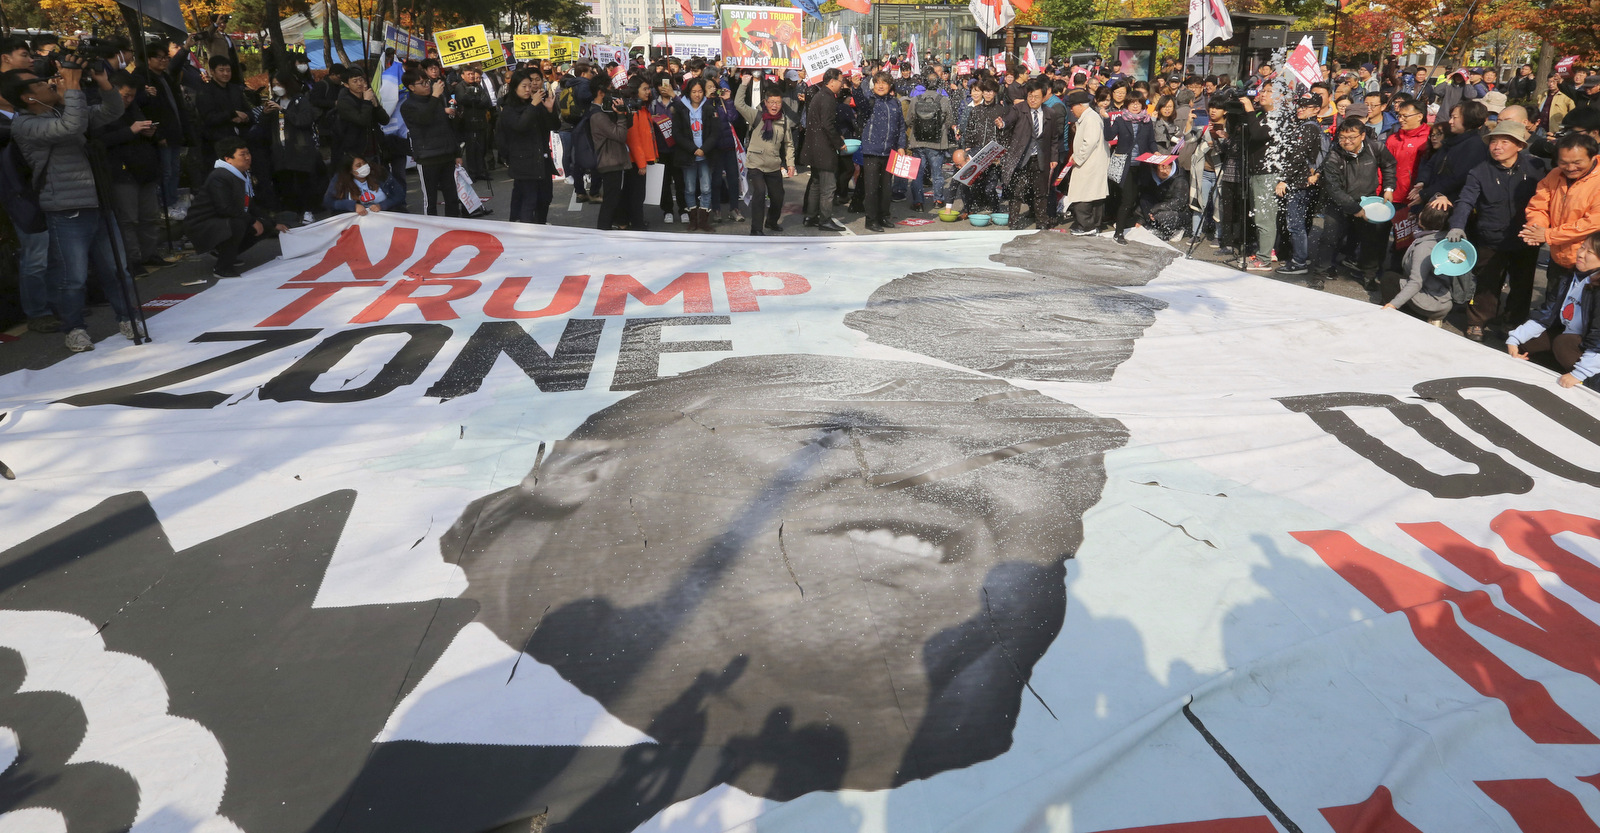 Members of "No Trump Coalition" hurl salt at a banner showing images of the U.S. President Donald Trump during a rally against his visit in front of the National Assembly in Seoul, South Korea, Nov. 8, 2017. (AP/Ahn Young-joon)